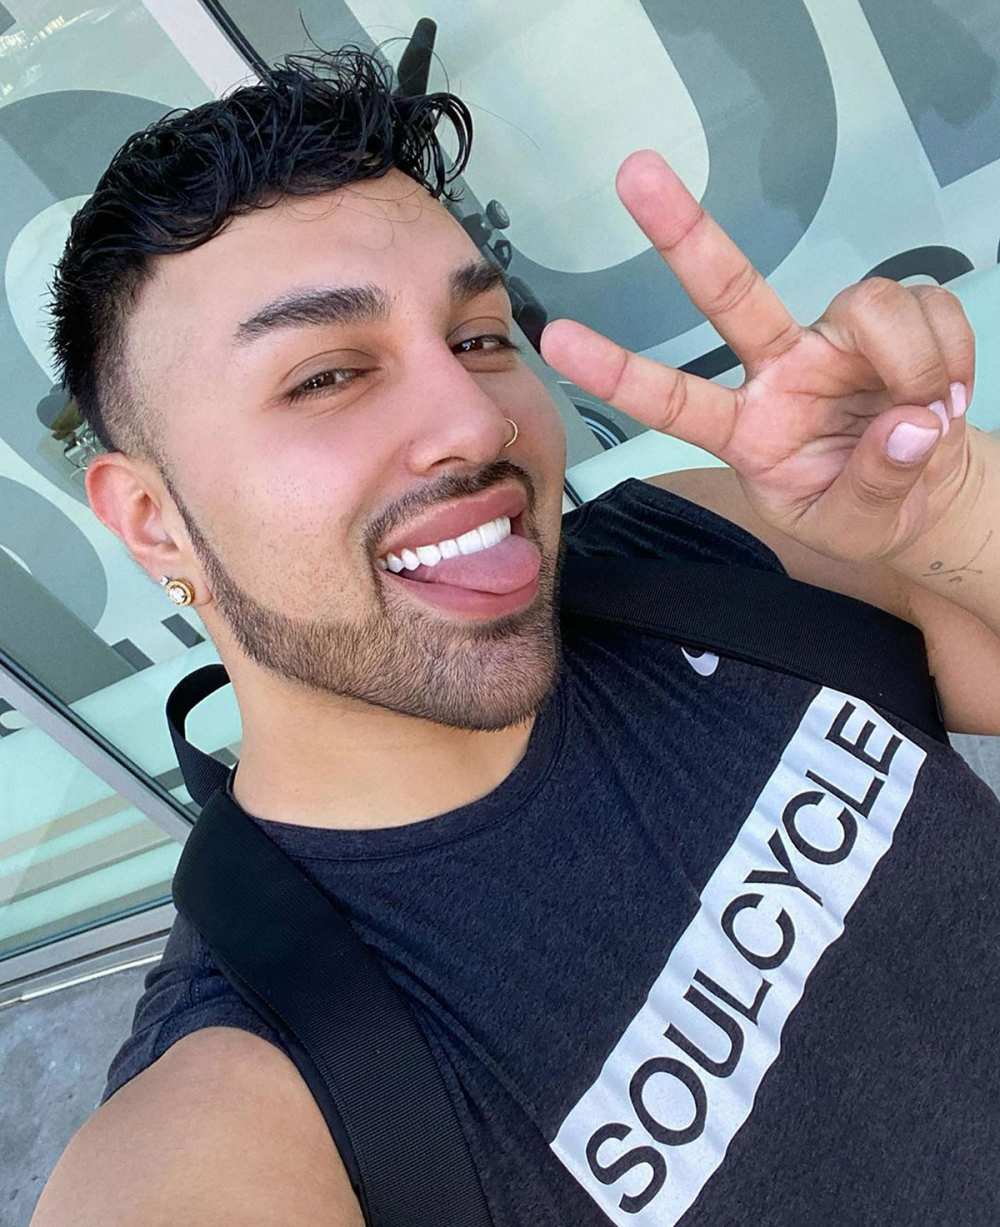 Beauty Influencer Mac_Daddyy Shares Tips for Flawless Makeup, Dealing With Haters